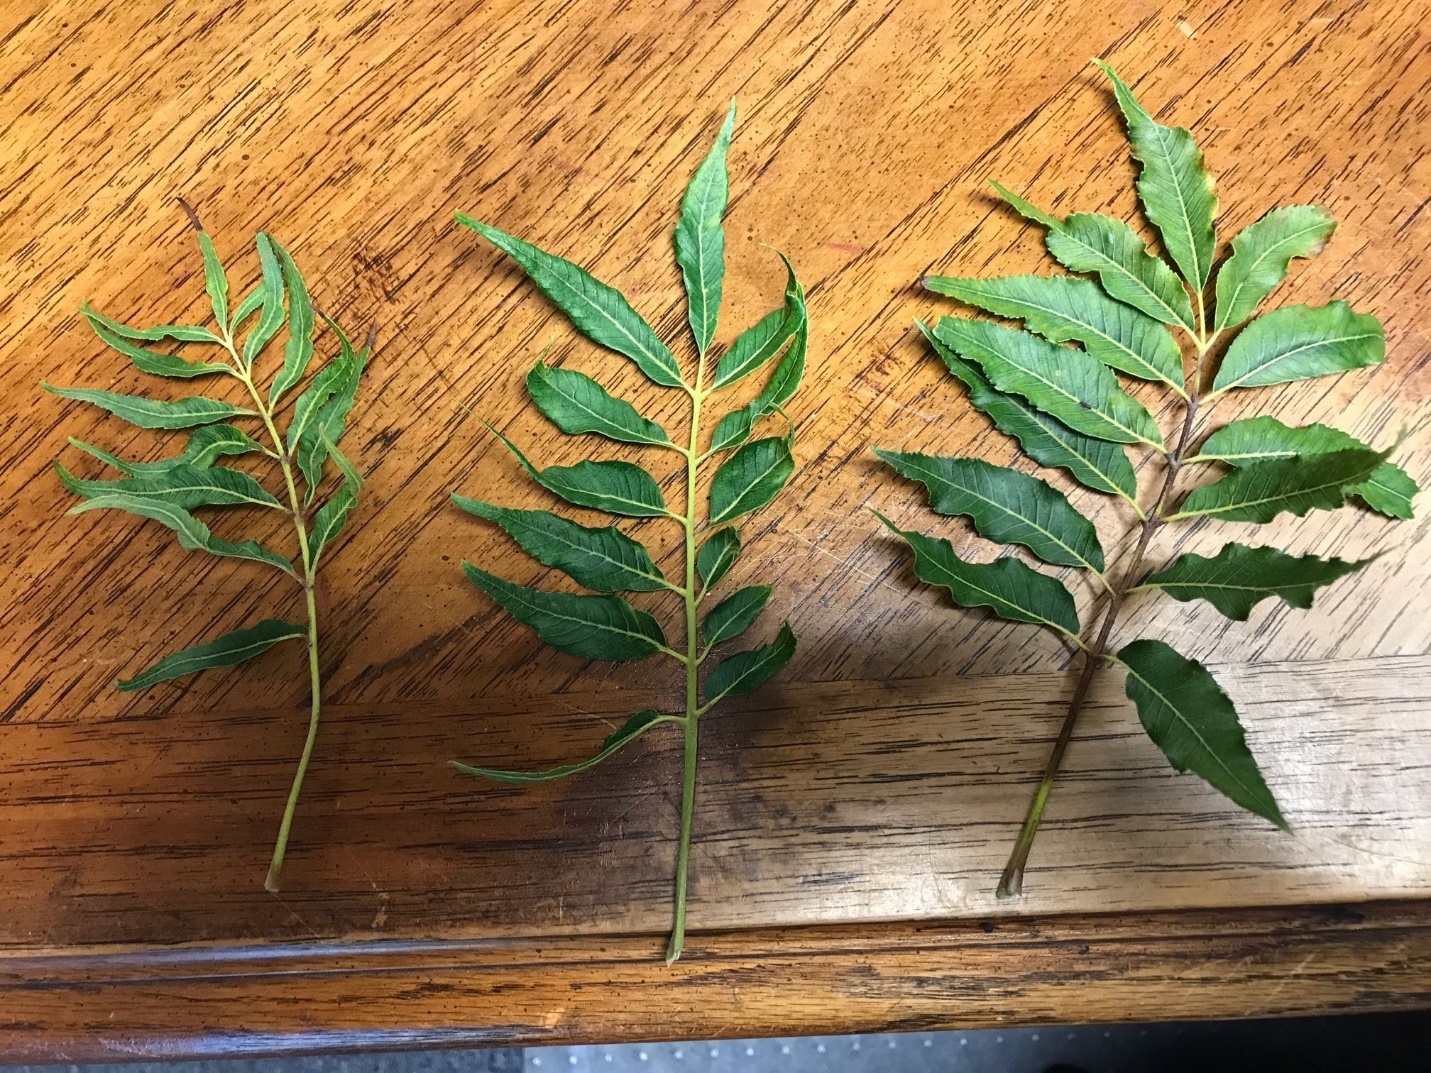 Pecan leaves with glyphosate injury and leaves with zinc deficiency. The glyphosate injured leaves are smaller and appear shriveled. The zinc deficient leaves have wavy margins.